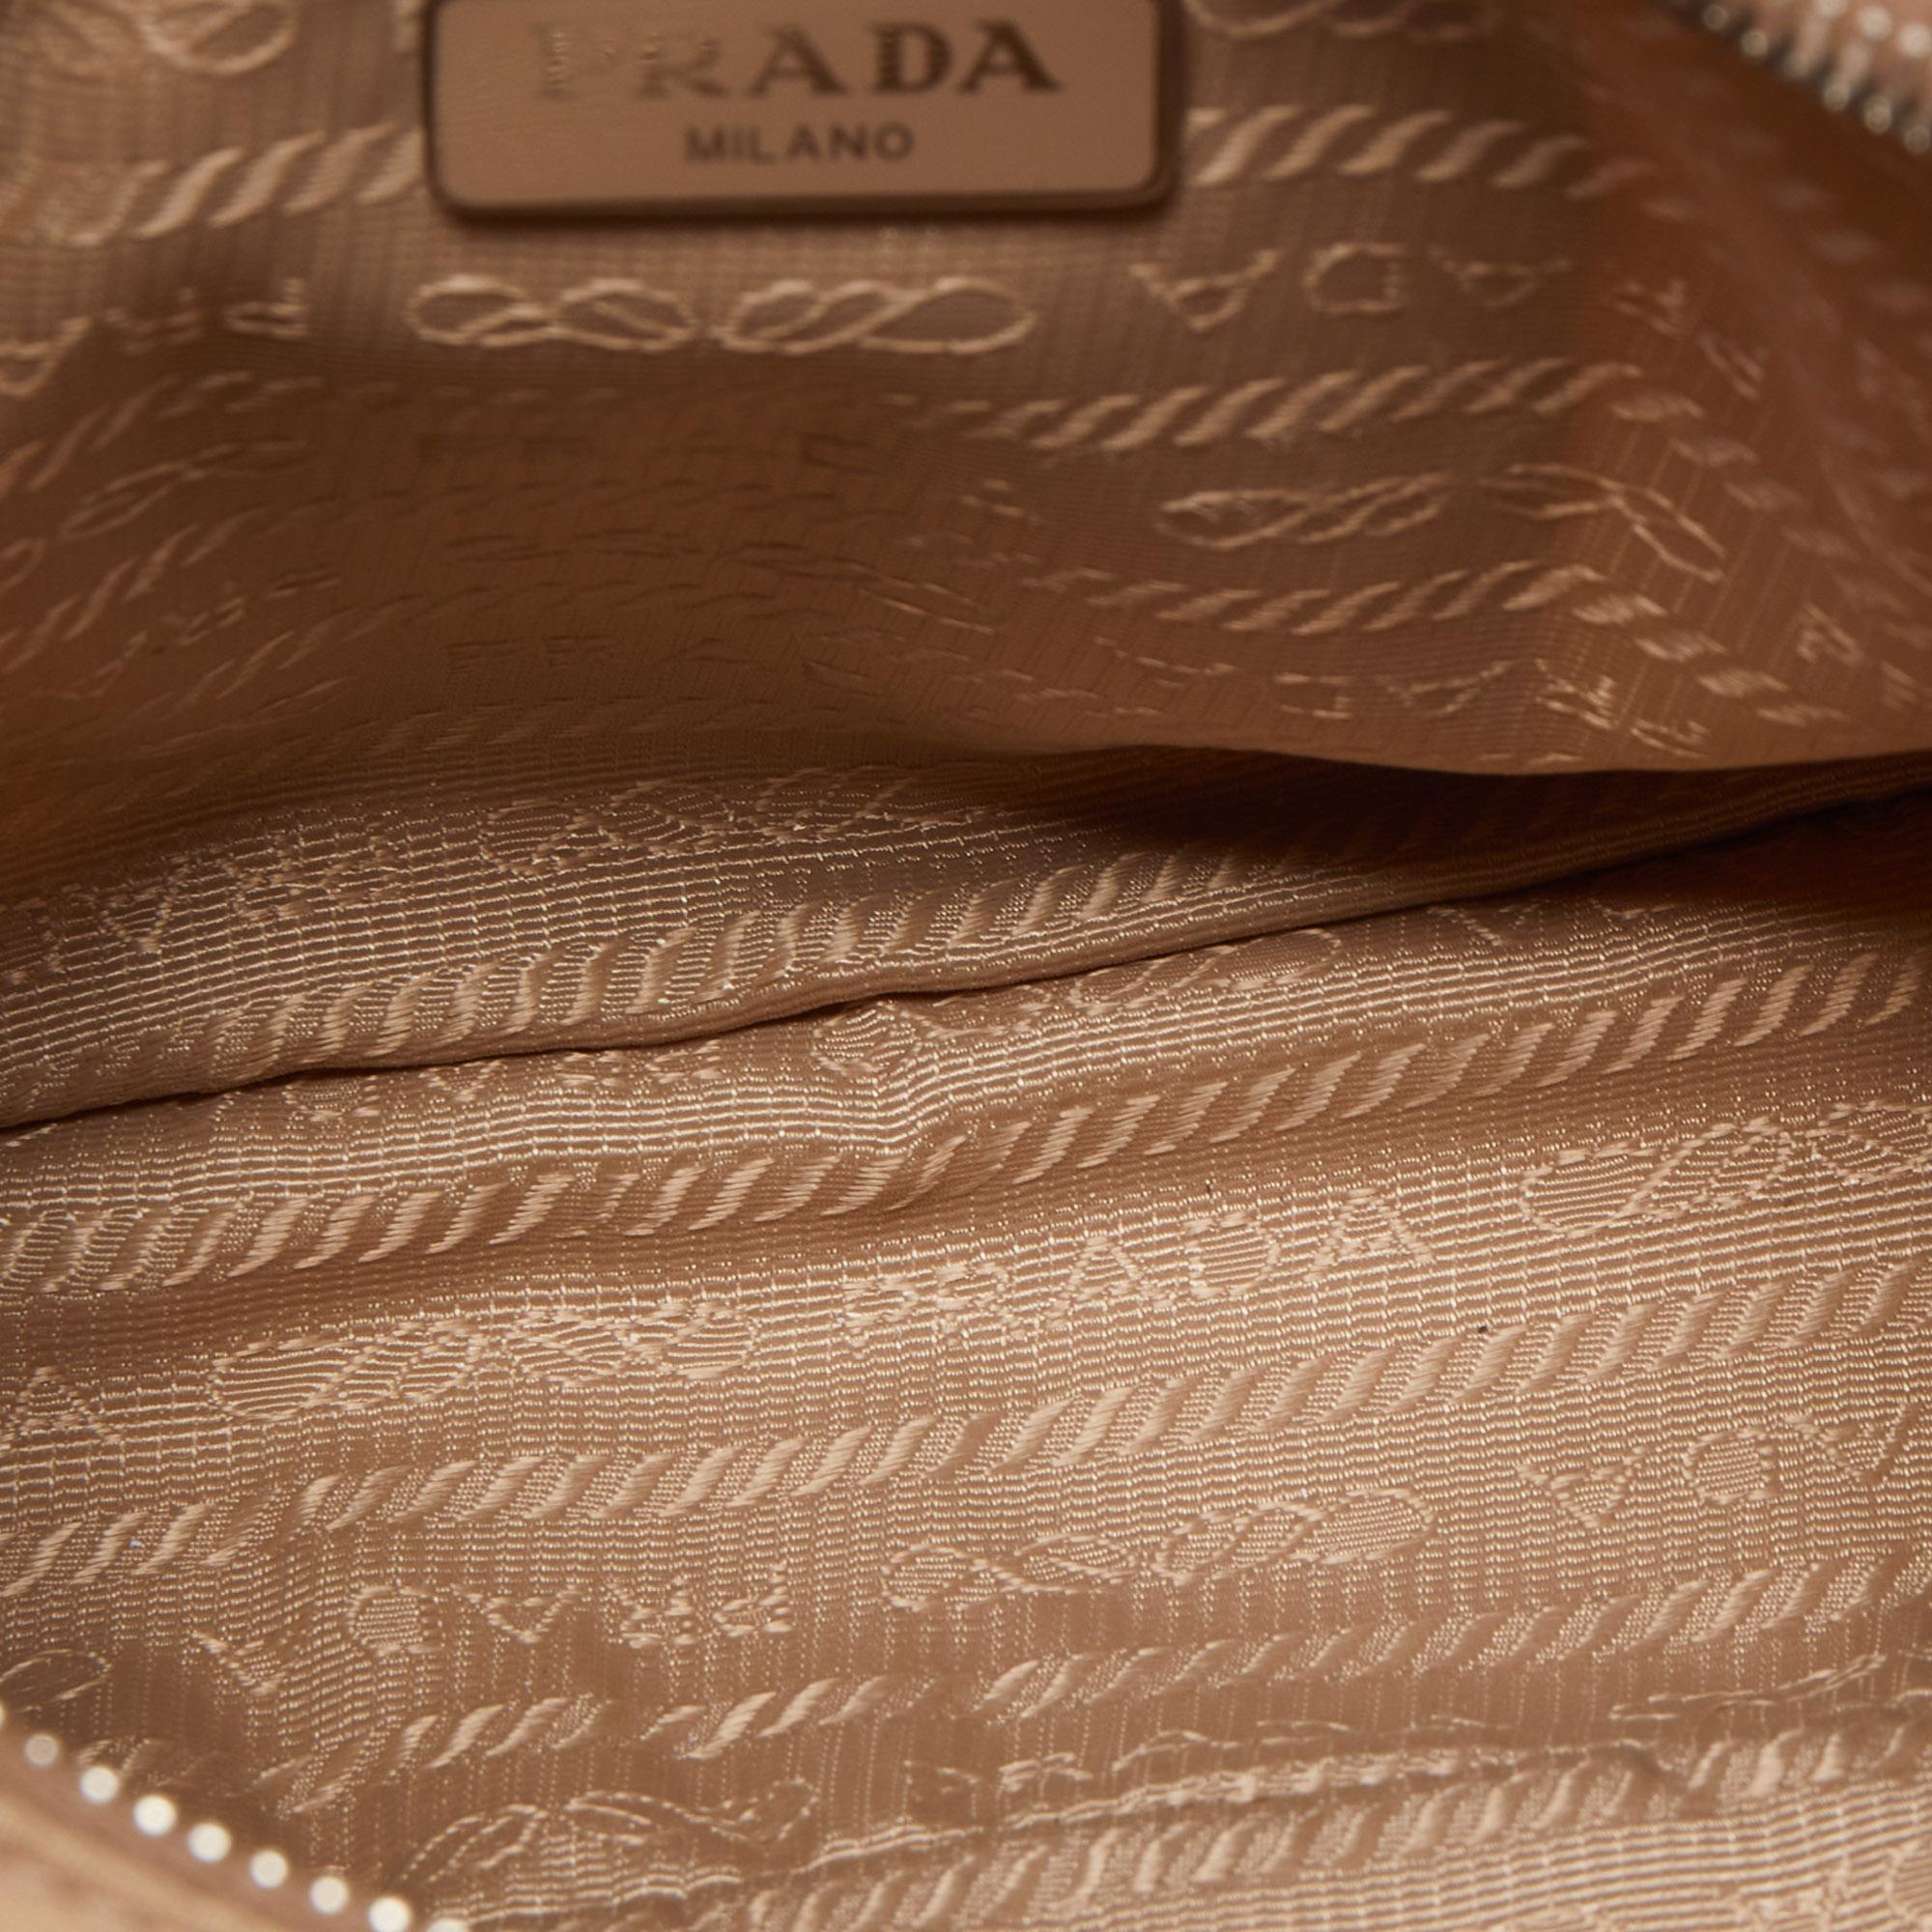 Prada Beige Nylon and Leather Re-Edition 2005 Baguette Bag 3